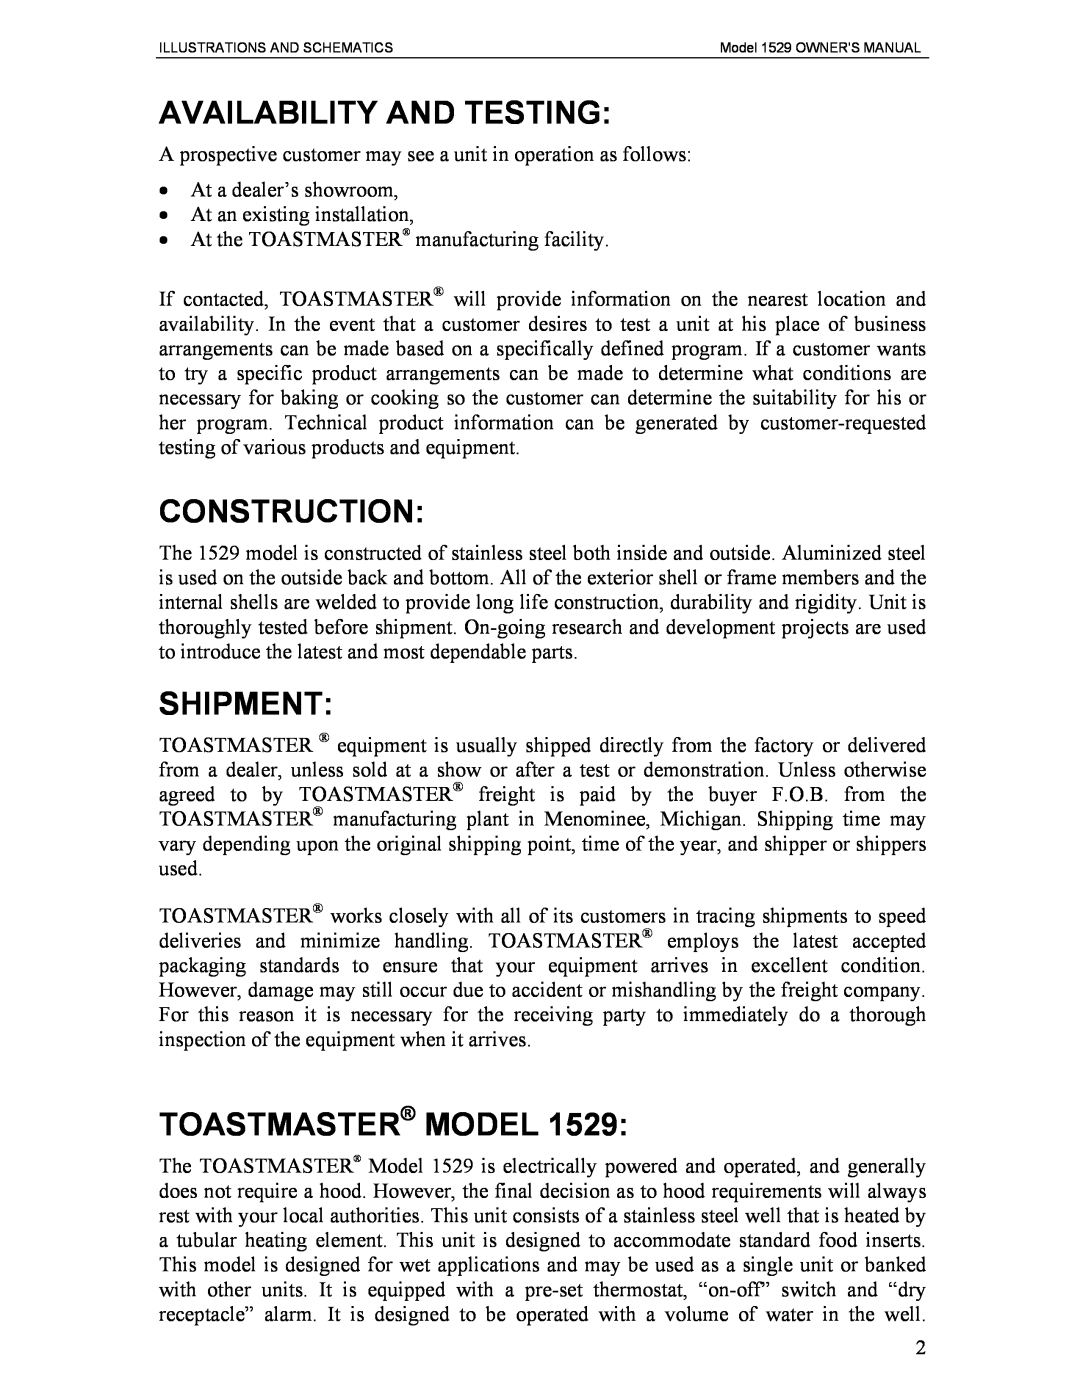 Toastmaster 1529 owner manual Availability And Testing, Construction, Shipment, Toastmaster Model 